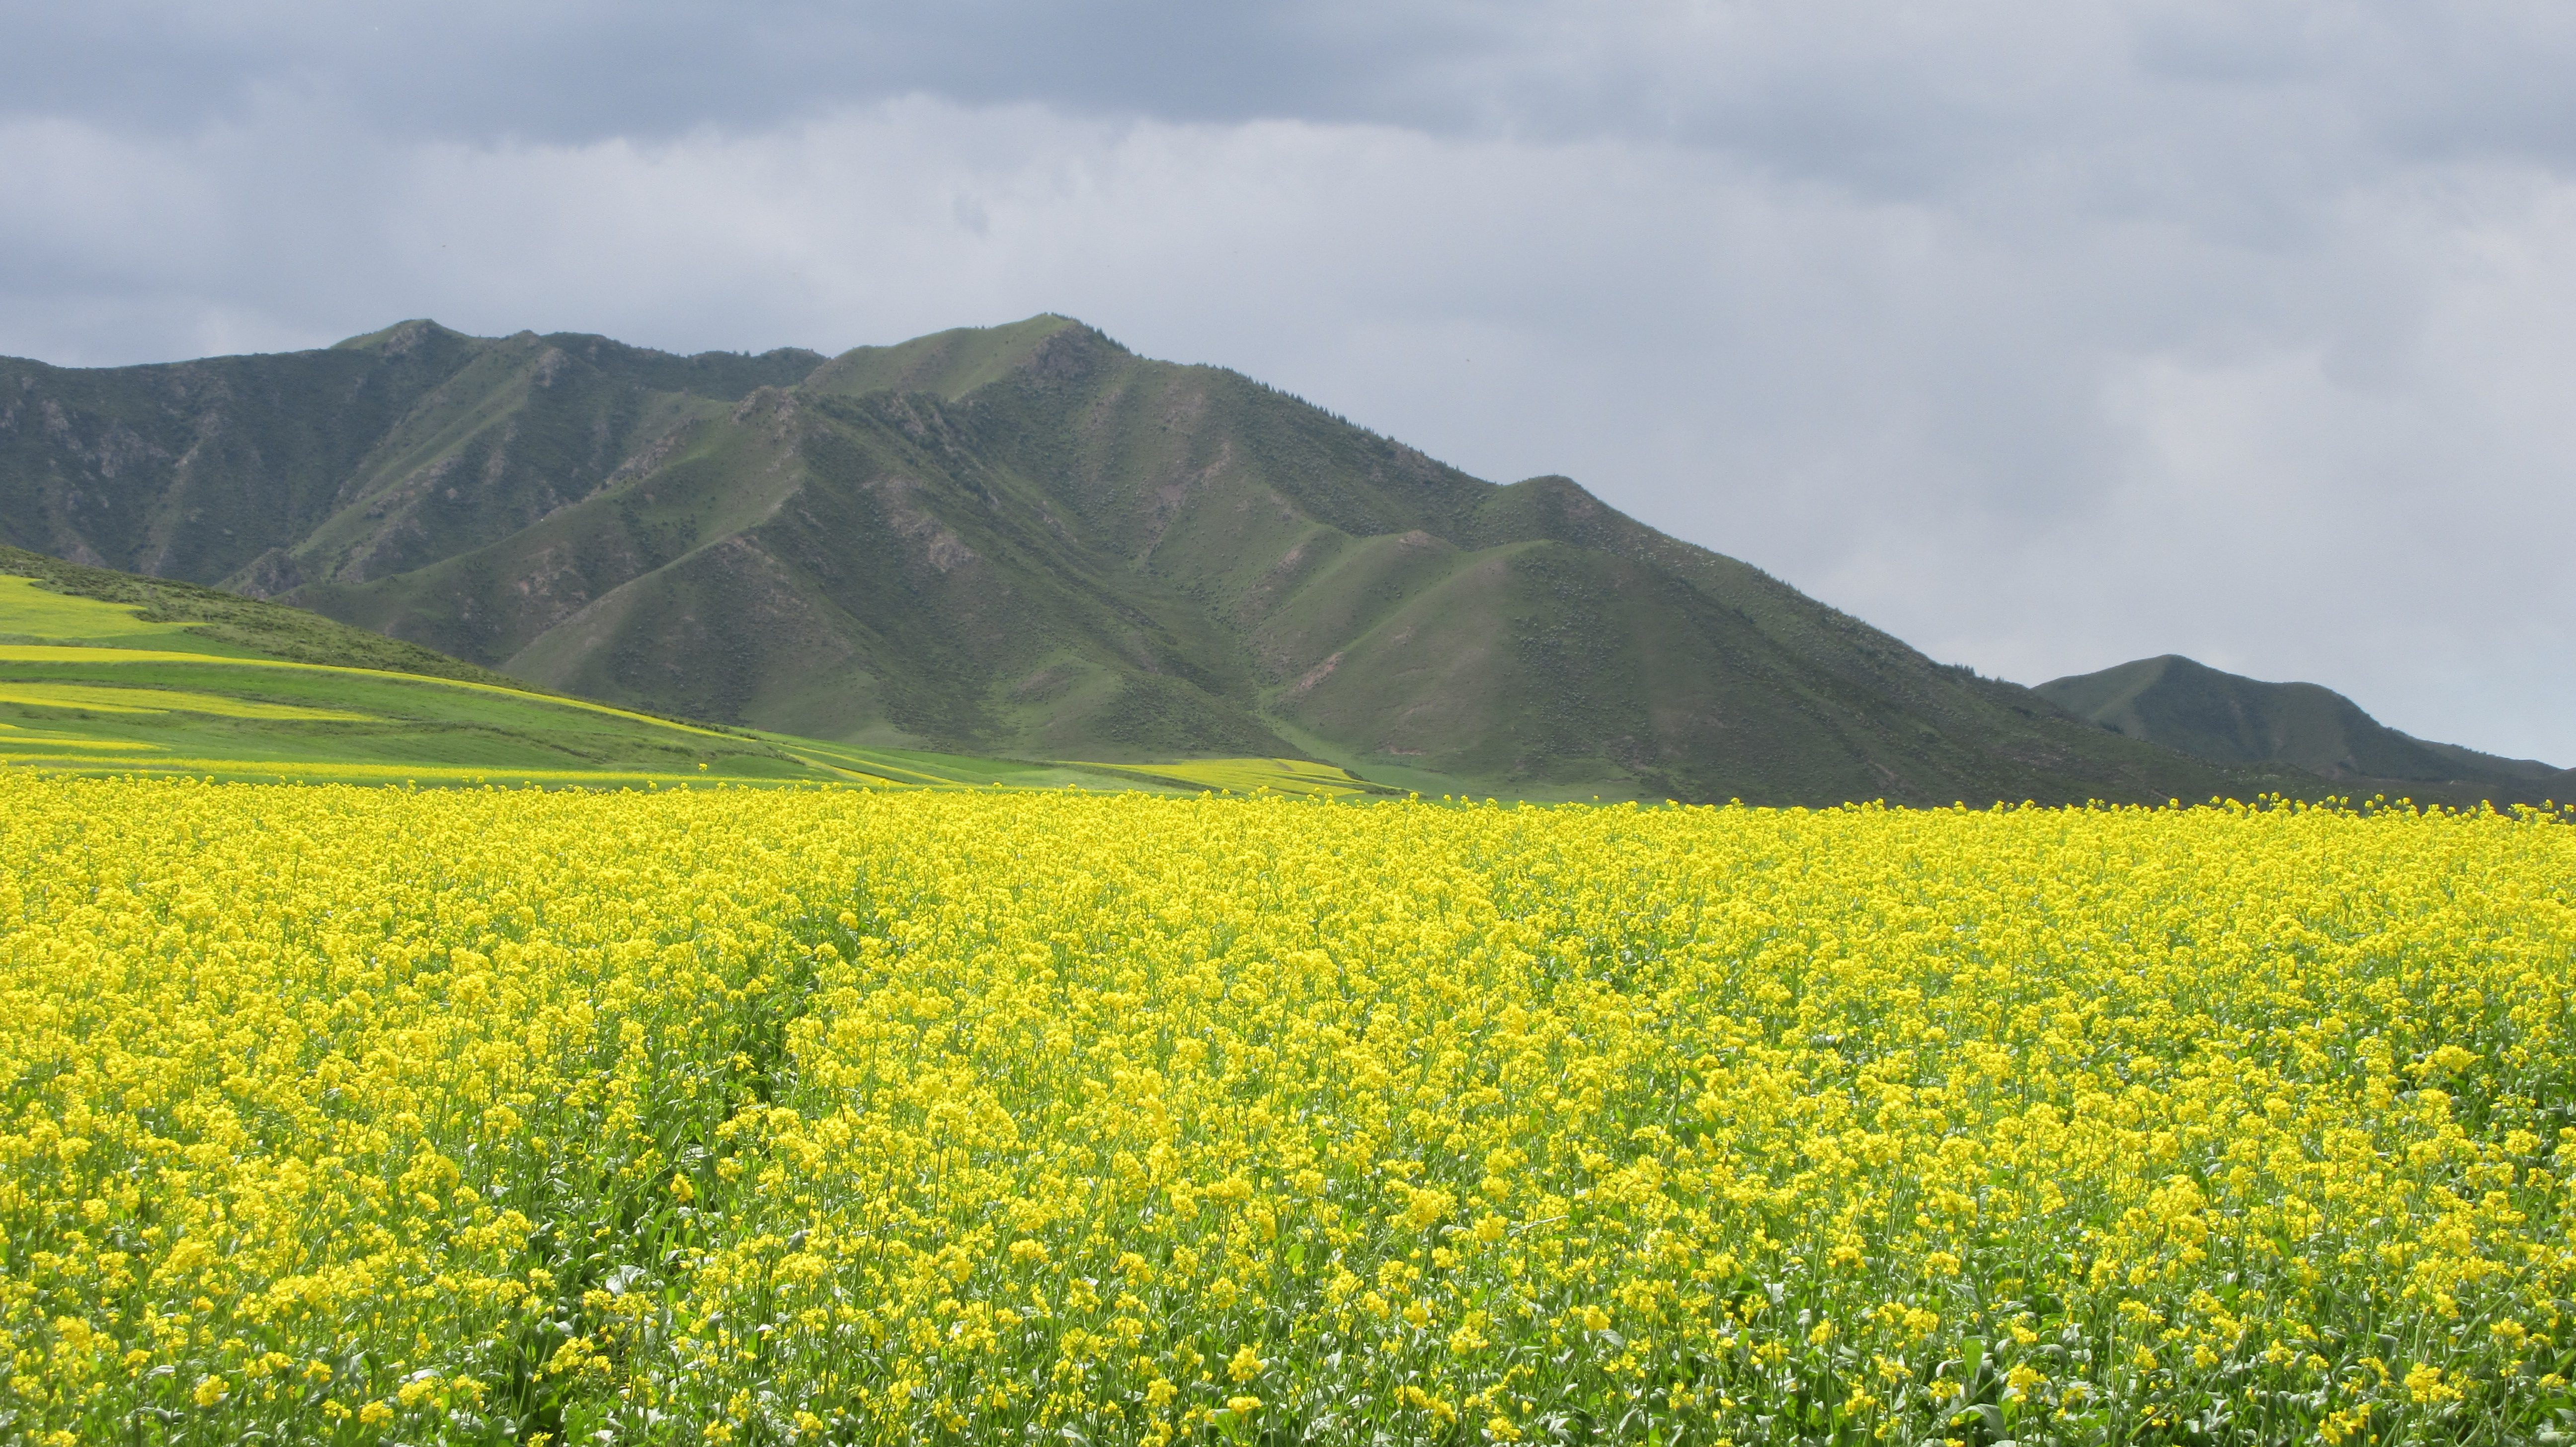 SEA OF YELLOW. If you come at the right season, you'll see a sea of yellow flowers in Biandukou, a day trip from Zhangye. 